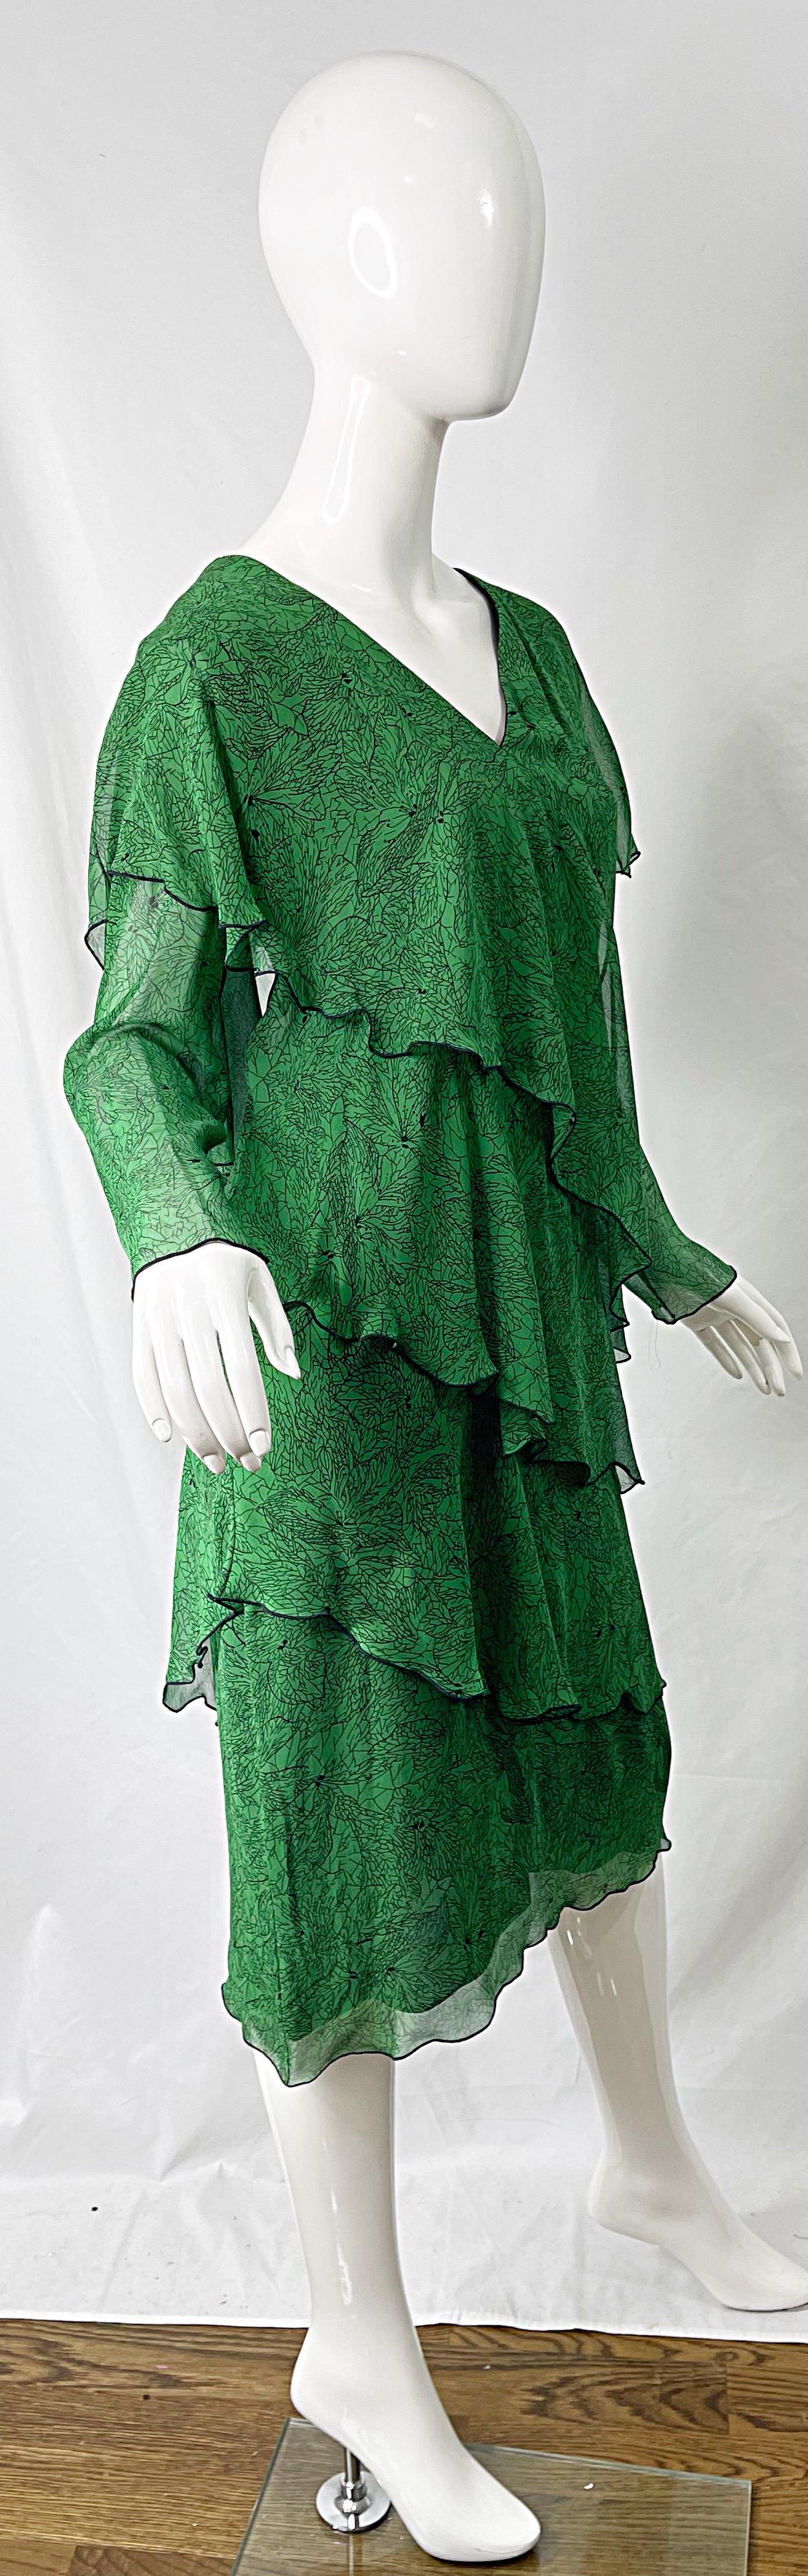 1970s Holly’s Harp Green Leaf Print Silk Chiffon Tiered Vintage 70s Dress For Sale 4